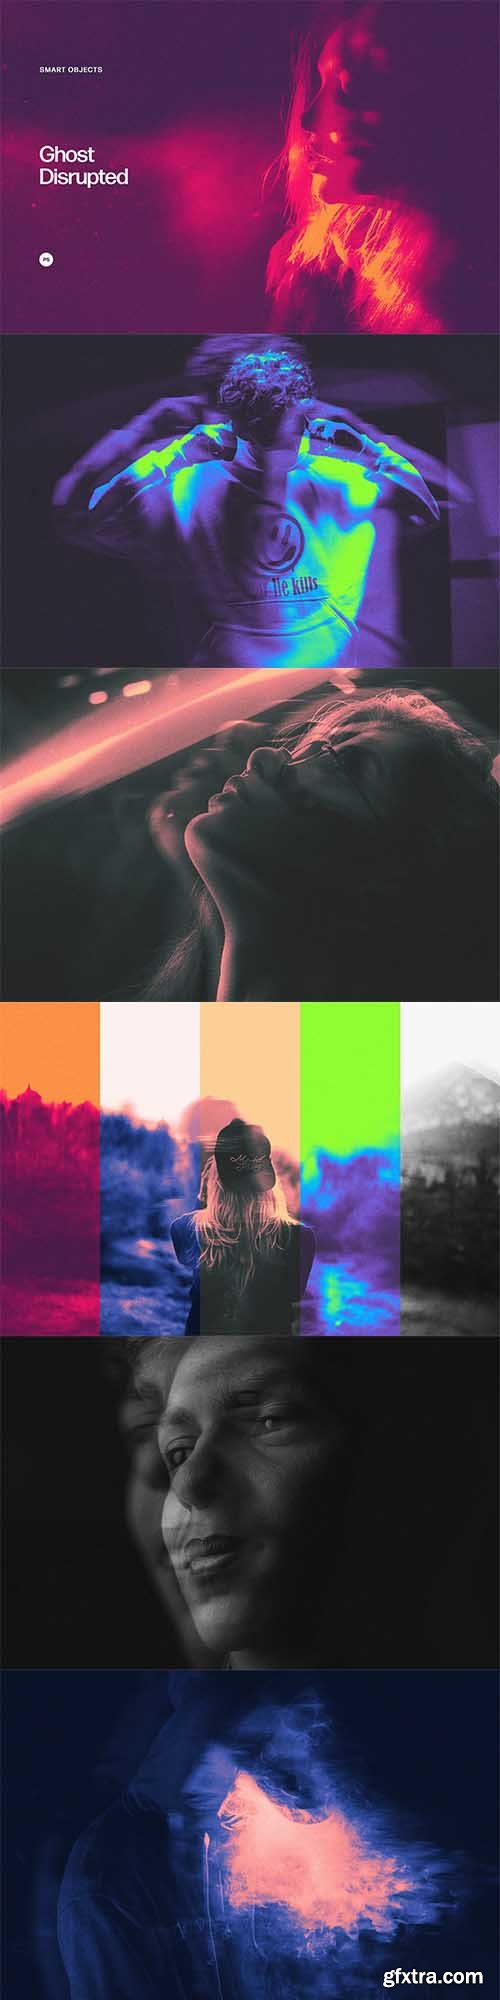 CreativeMarket - Ghost: Disrupted Photo Effect 6850458